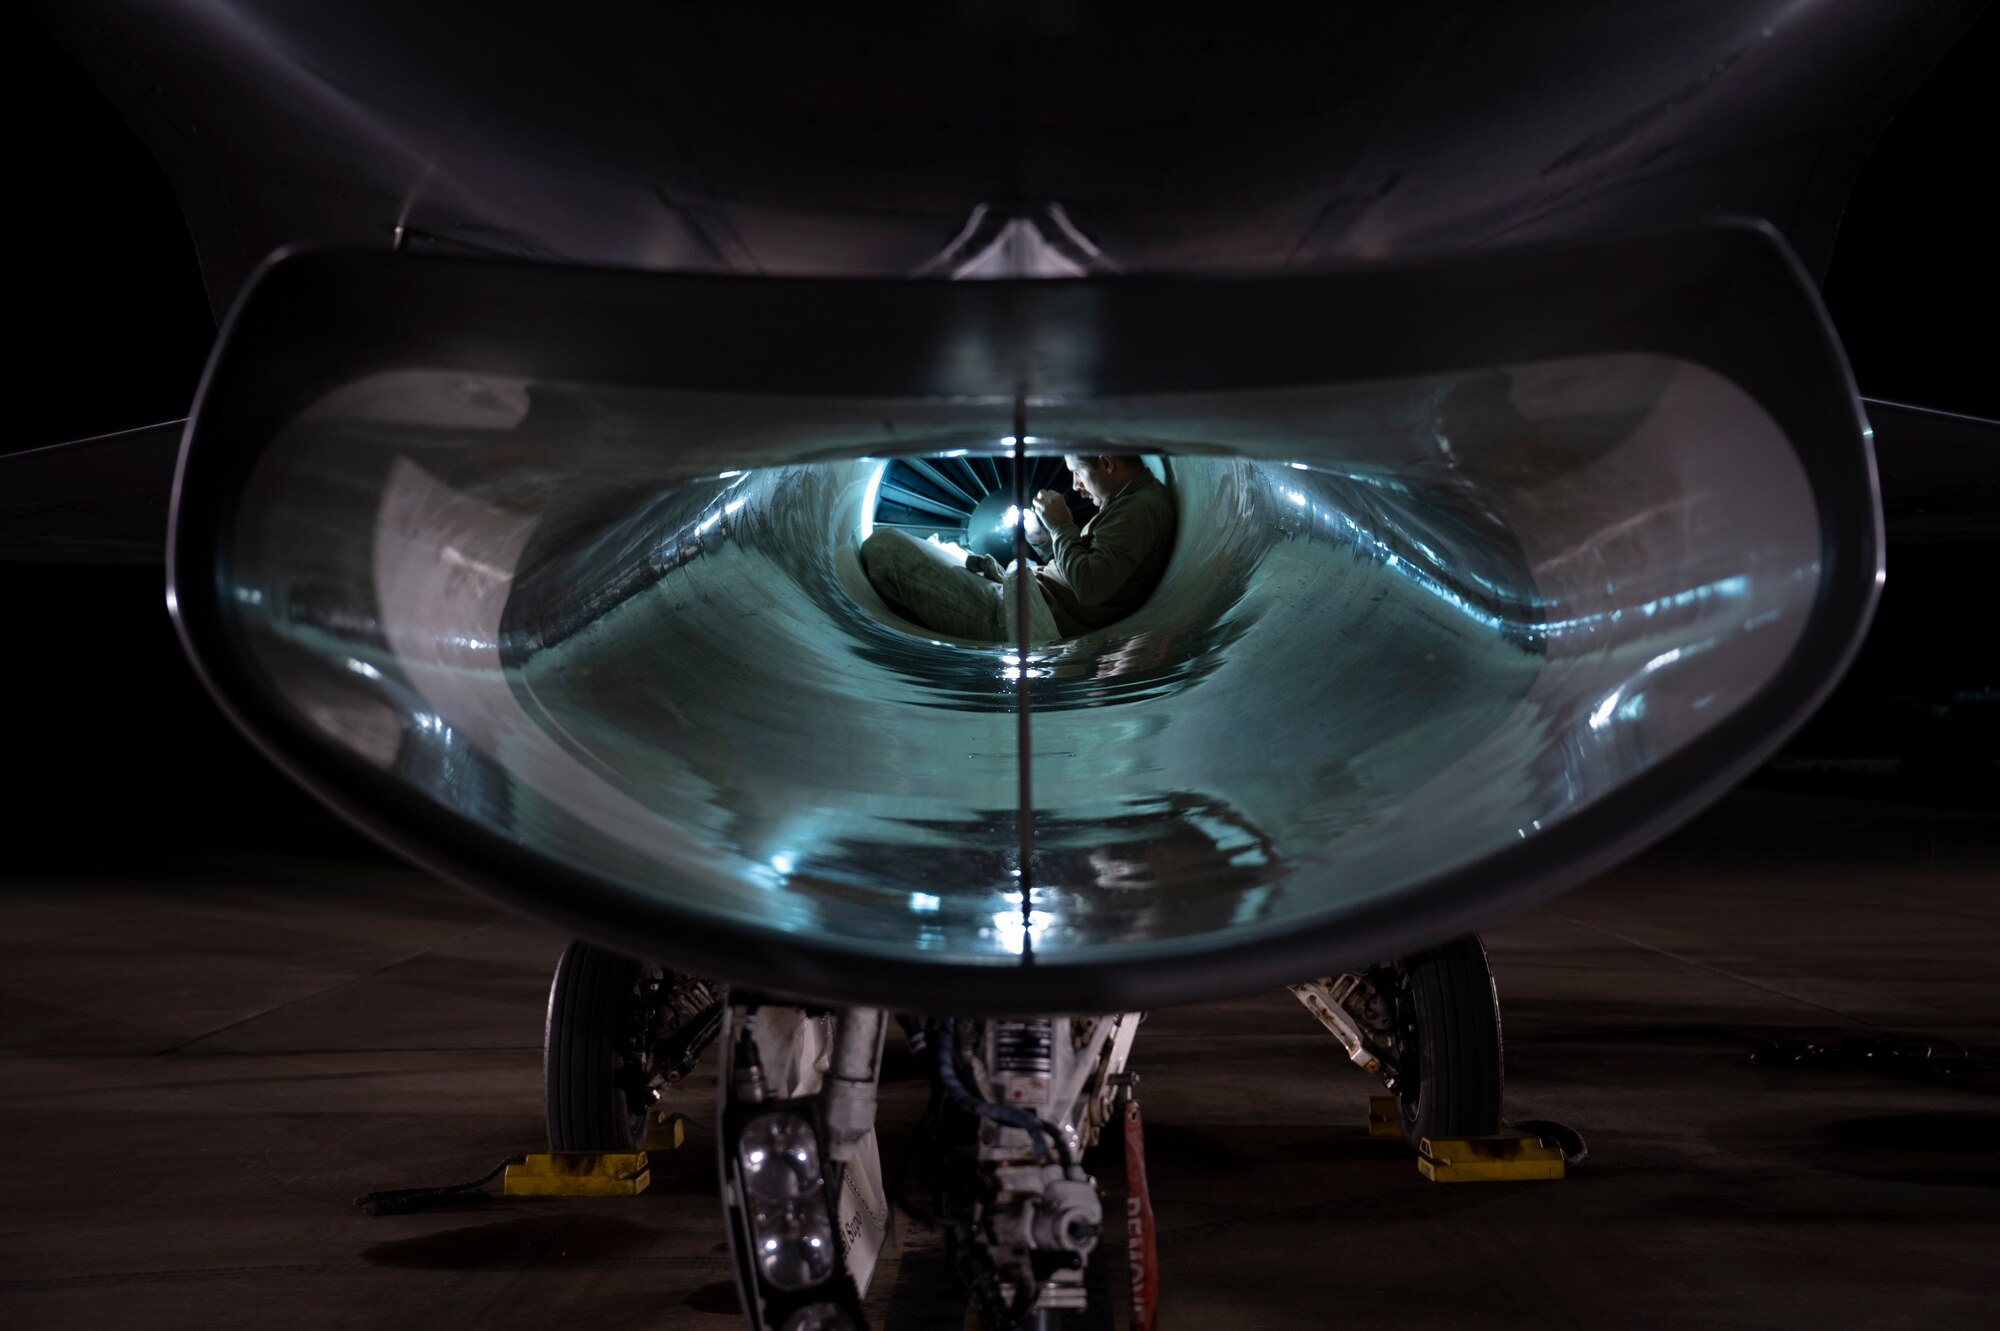 U.S. Air Force Staff Sgt. Nathan Nybakke, 311th Maintenance Squadron Propulsion non-commissioned officer in charge, performs intake inspection of F-16 Viper at Holloman Air Force Base, New Mexico, Nov. 16. 2023. High-power engine run maintenance involves verification of serviceability of the aircraft and engine prior to and after flight or maintenance completion. (U.S. Air Force photo by U.S. Air Force Airman 1st Class Michelle Ferrari)